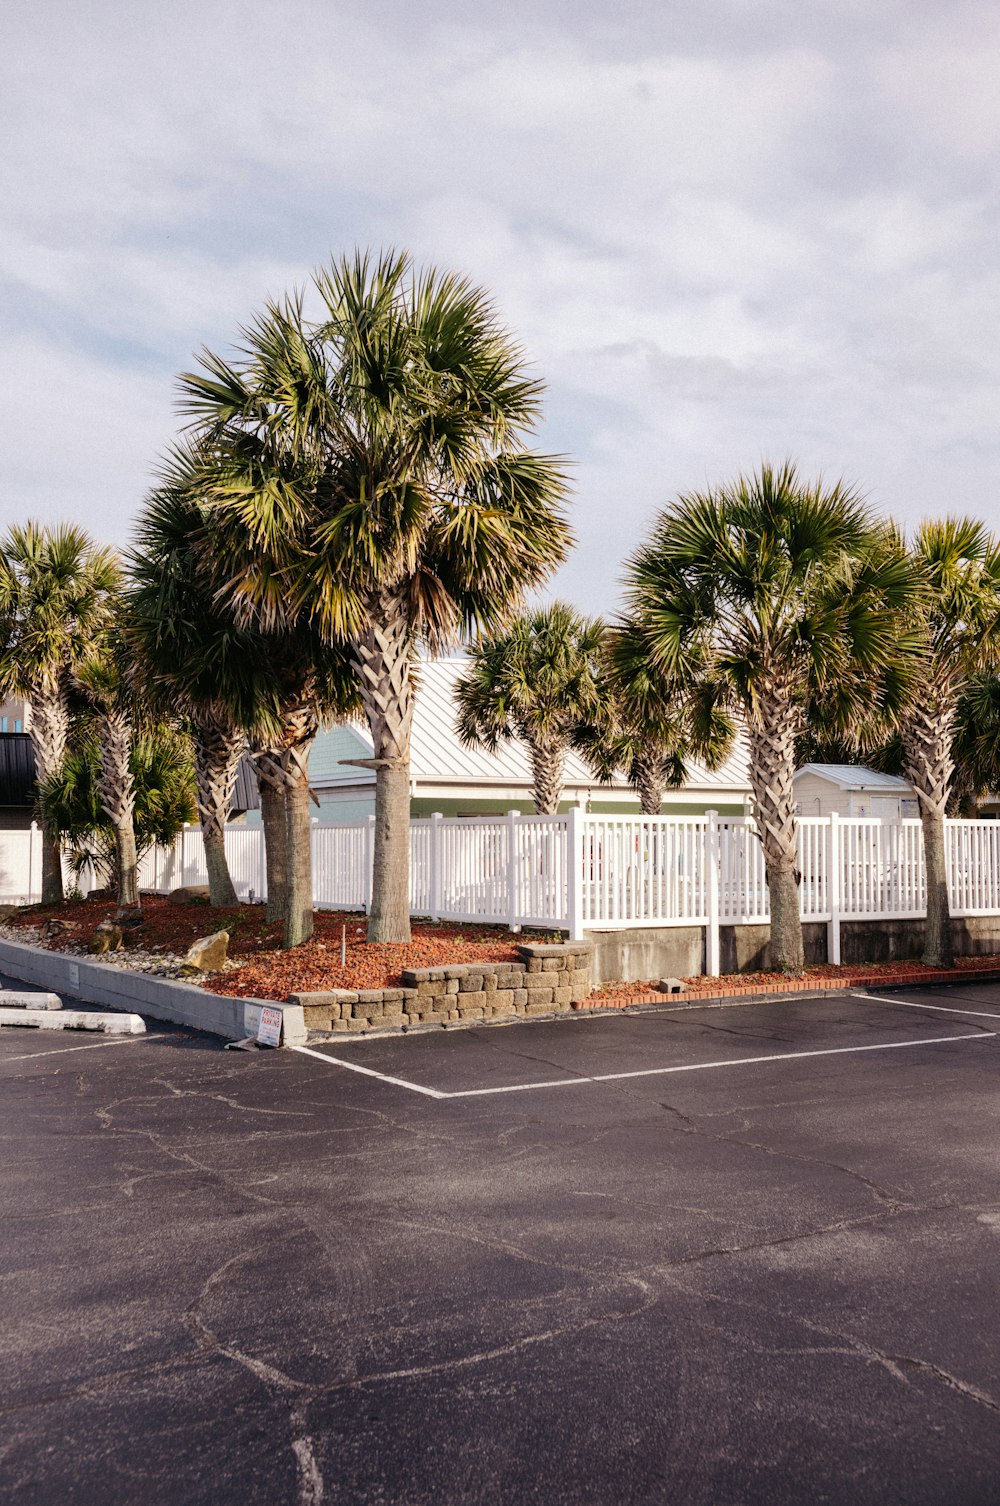 a parking lot with palm trees and a white fence